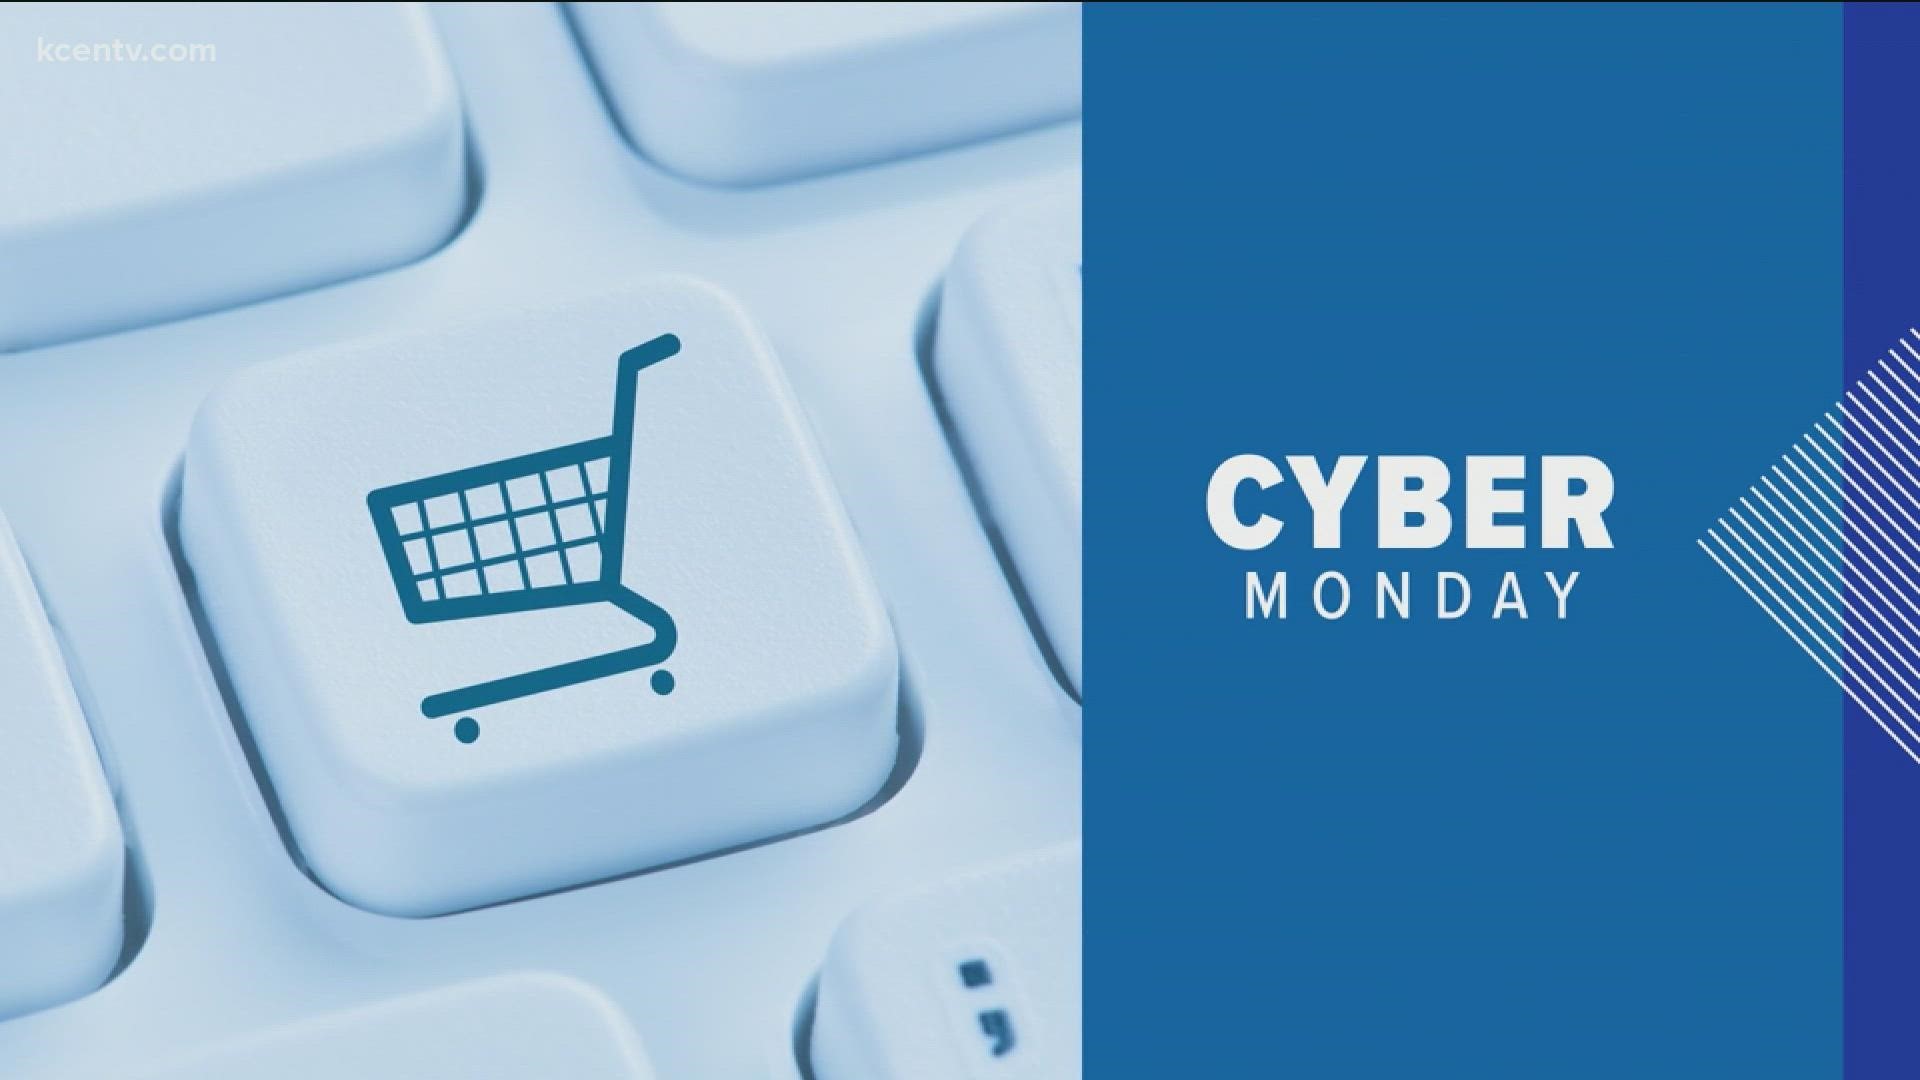 Even though you beat those lines for Black Friday, Cyber Monday will also come with its own set of challenges.